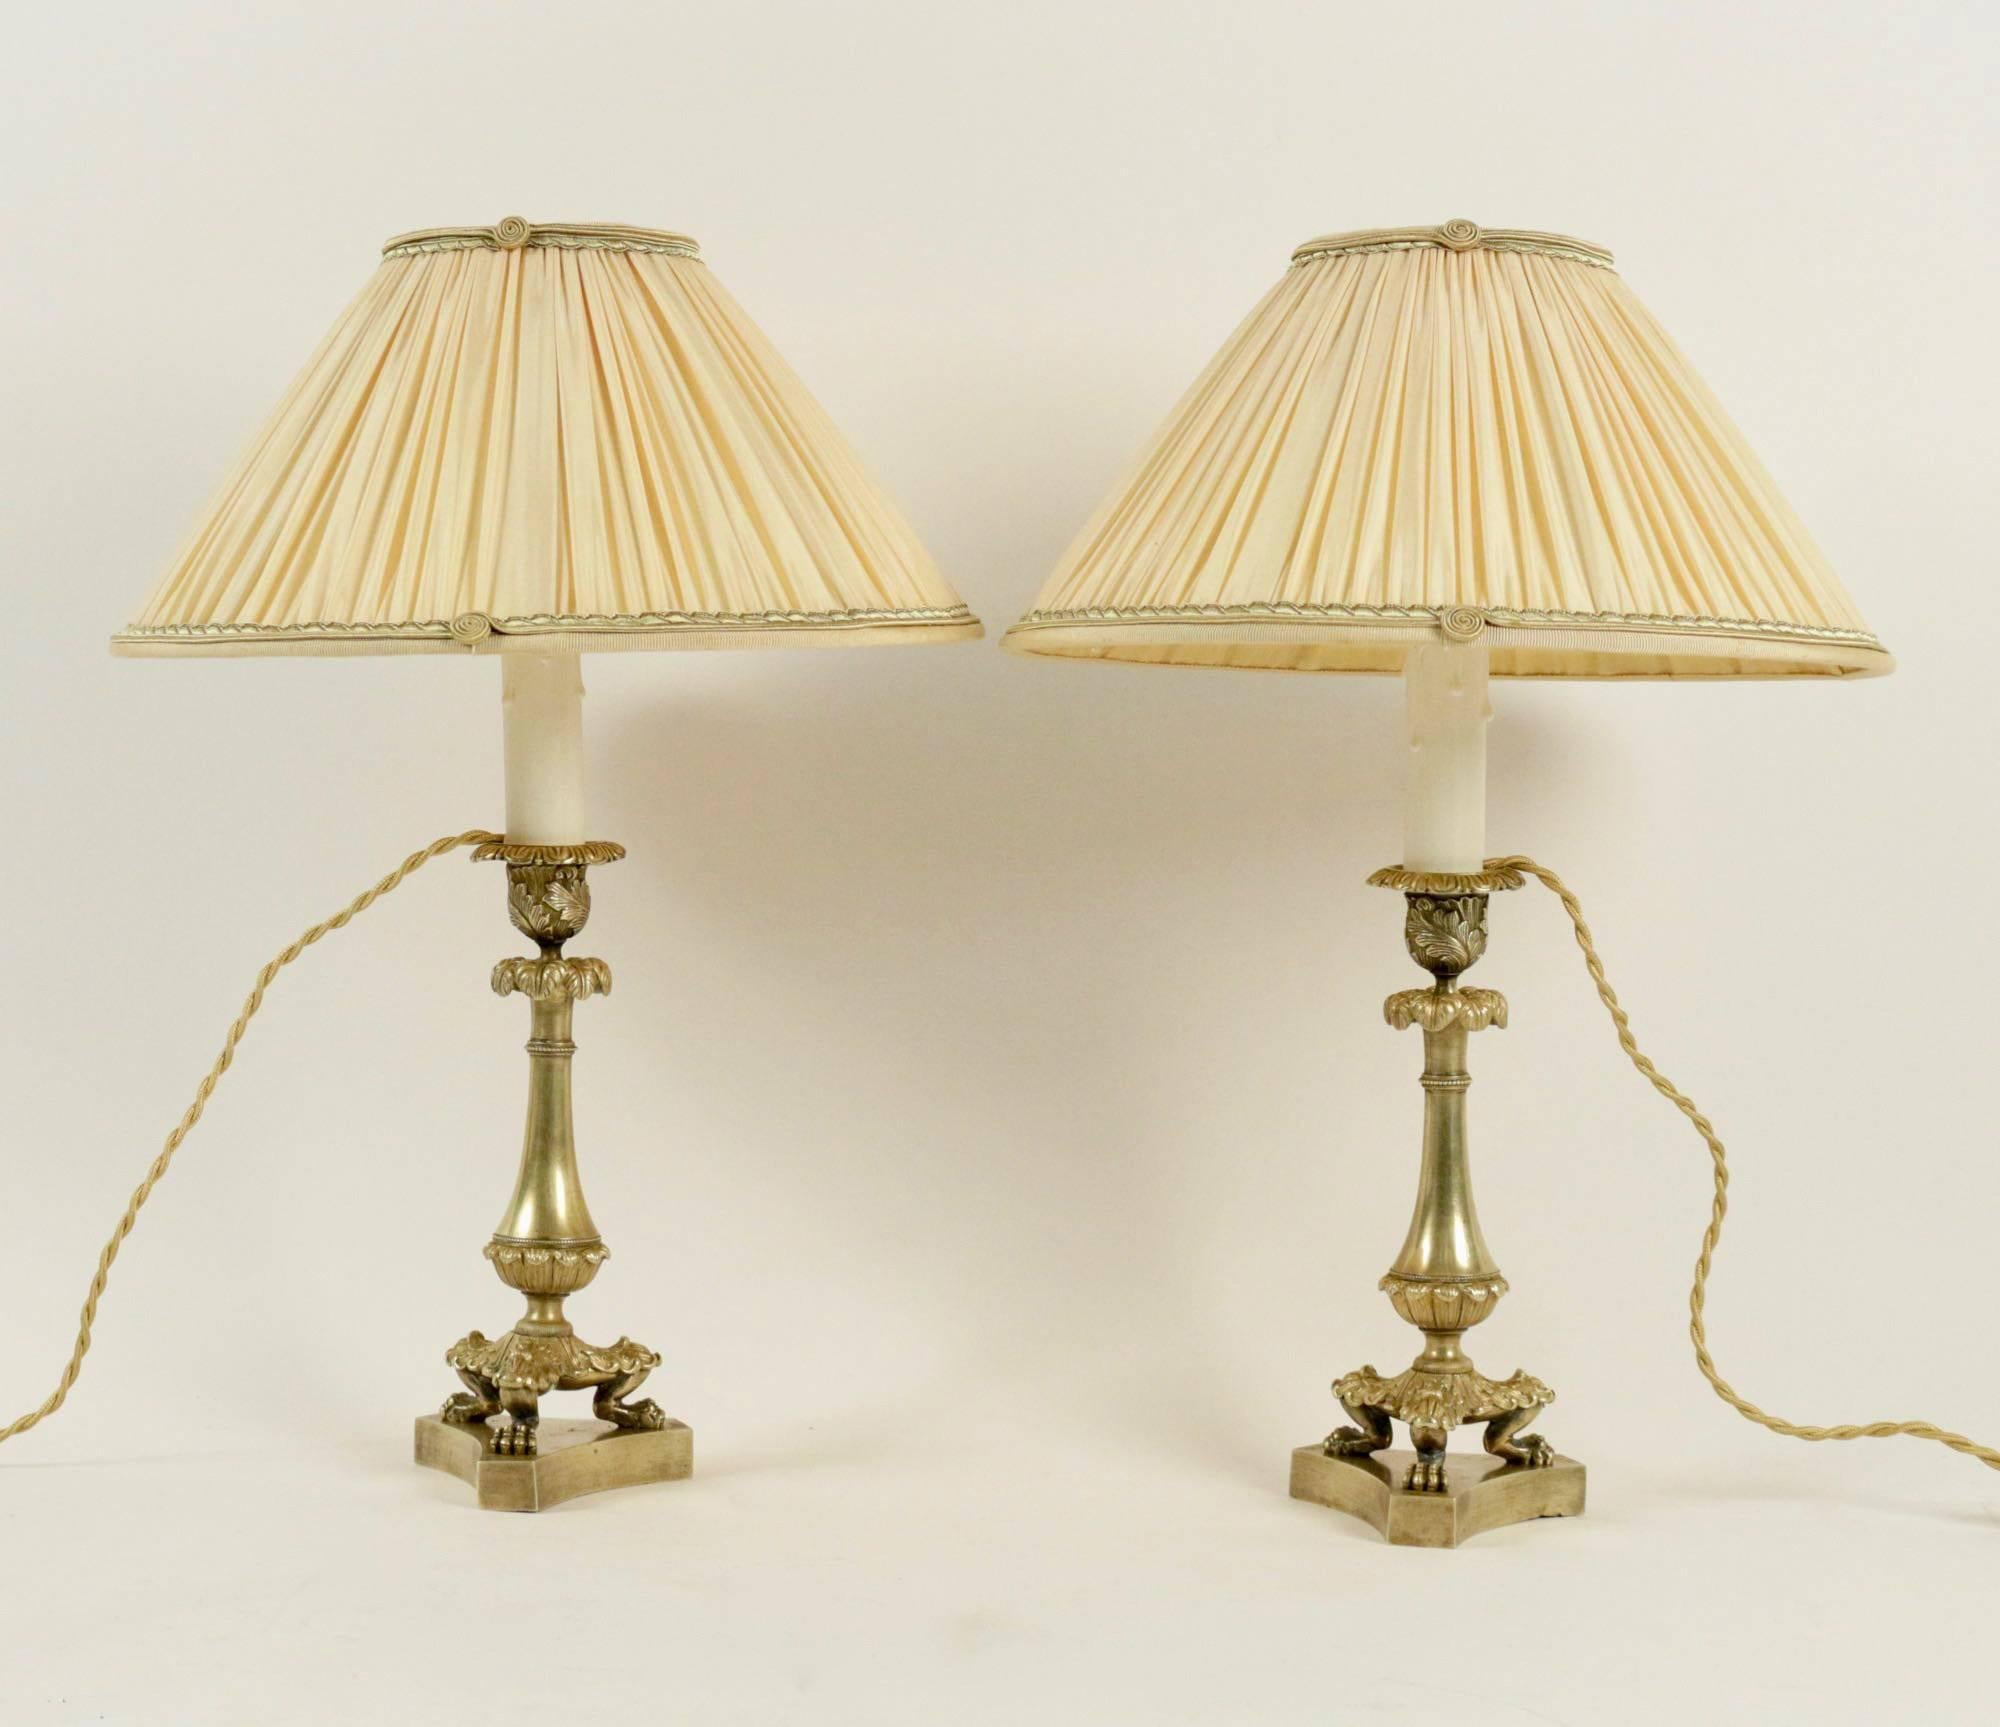 Pair of nicely-chased French Restauration period, original gilt bronze candlesticks, very finely chiselled, converted to table lamps, with new French pleated Ivory silk lamp shades.
French work mid-19th century, restauration period, circa